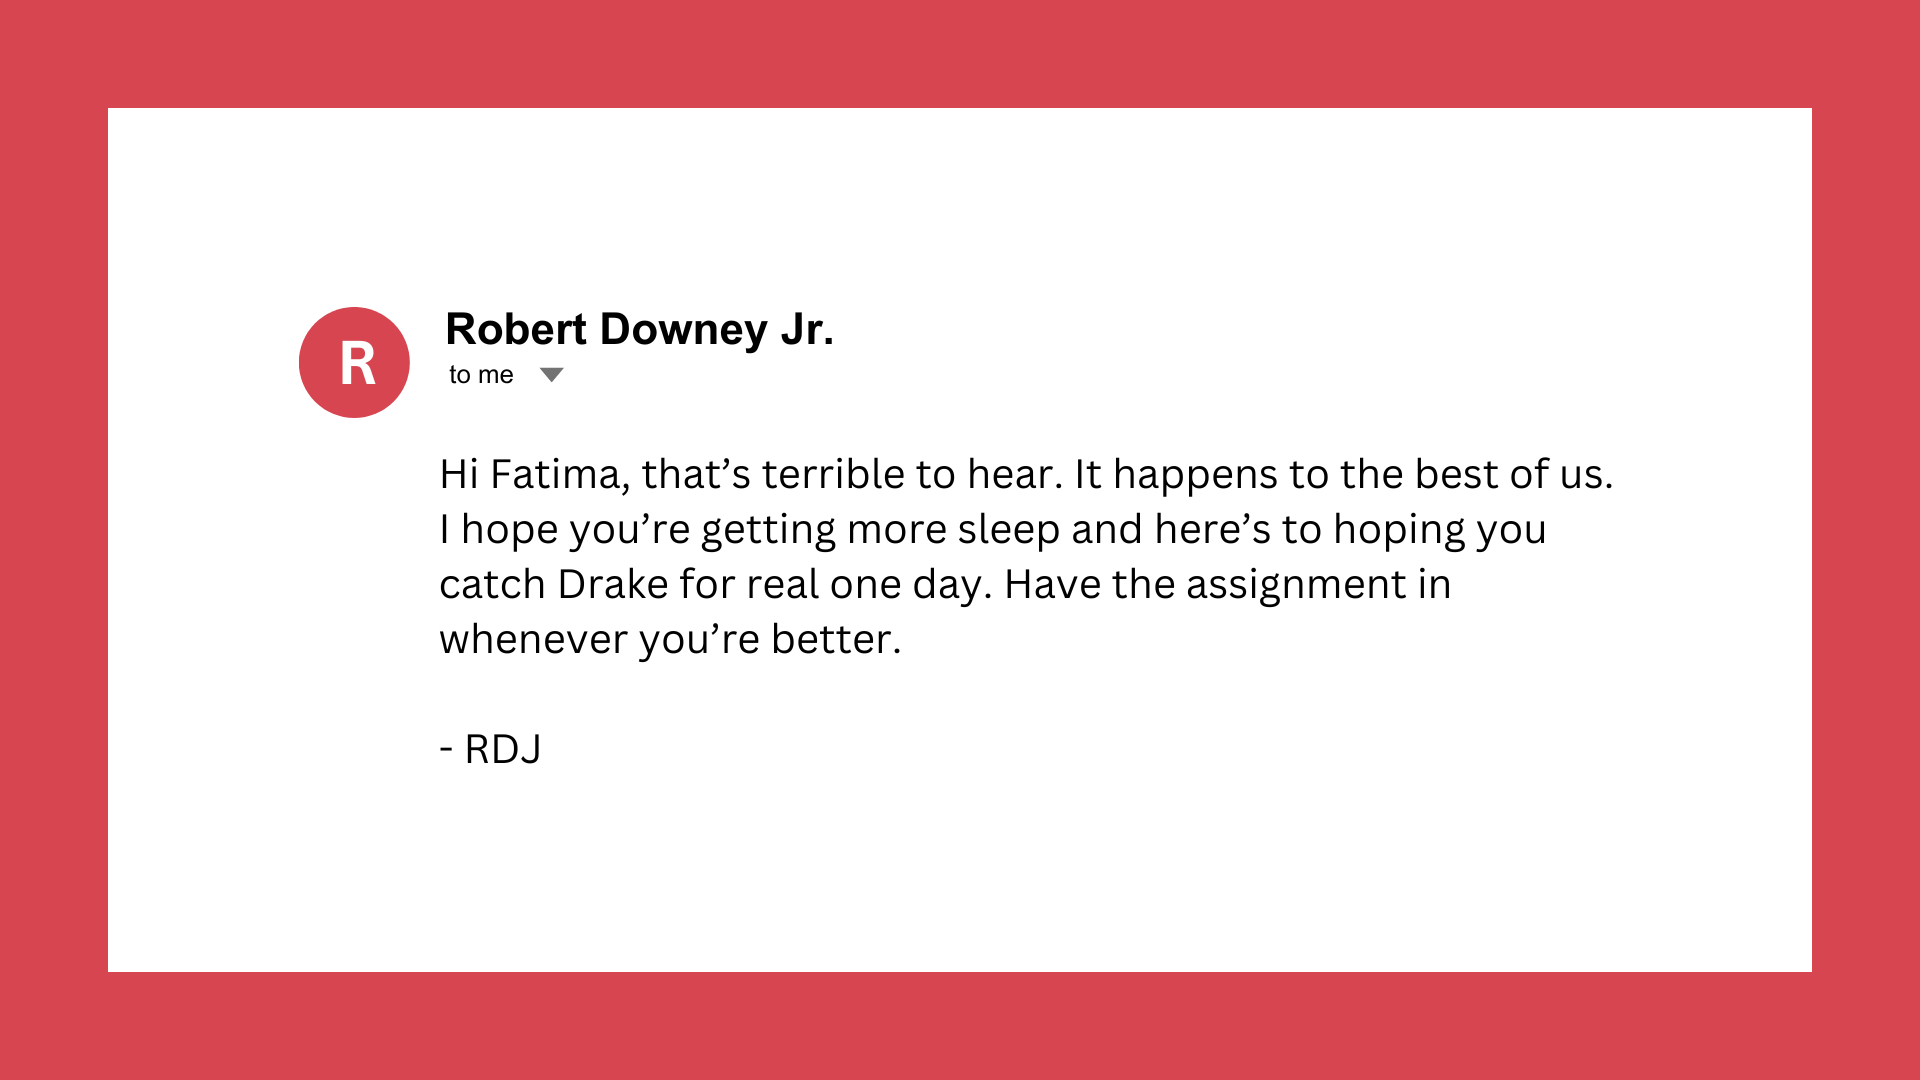 Fake email from Robert Downey Junior to Fatima. Email reads: Hi Fatima, that’s terrible to hear. It happens to the best of us. I hope you’re getting more sleep and here’s to hoping you catch Drake for real one day. Have the assignment in whenever you’re better.